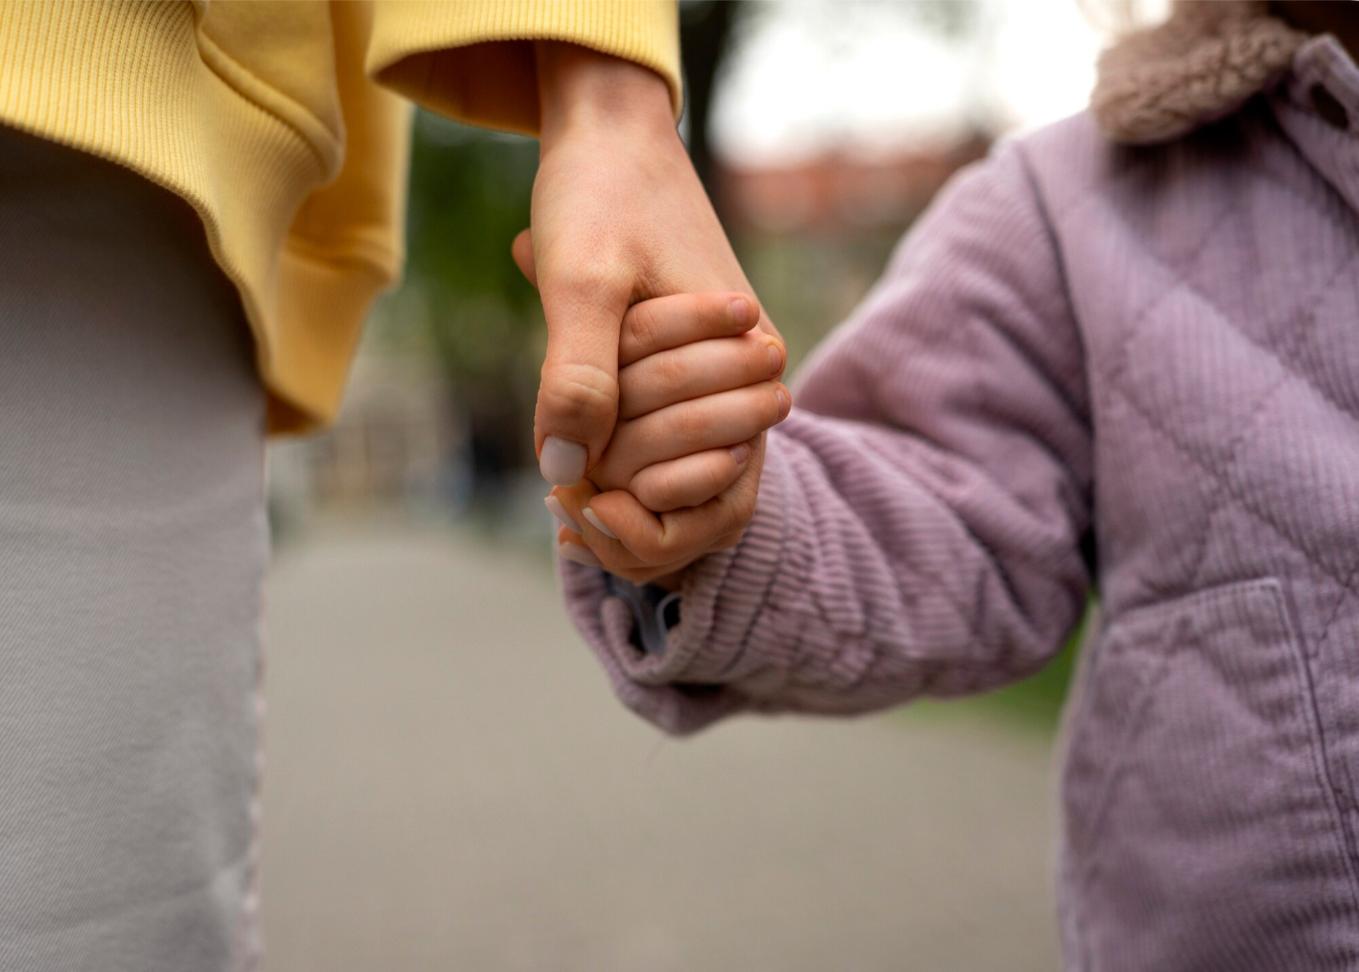 a close up of a hand holding a child